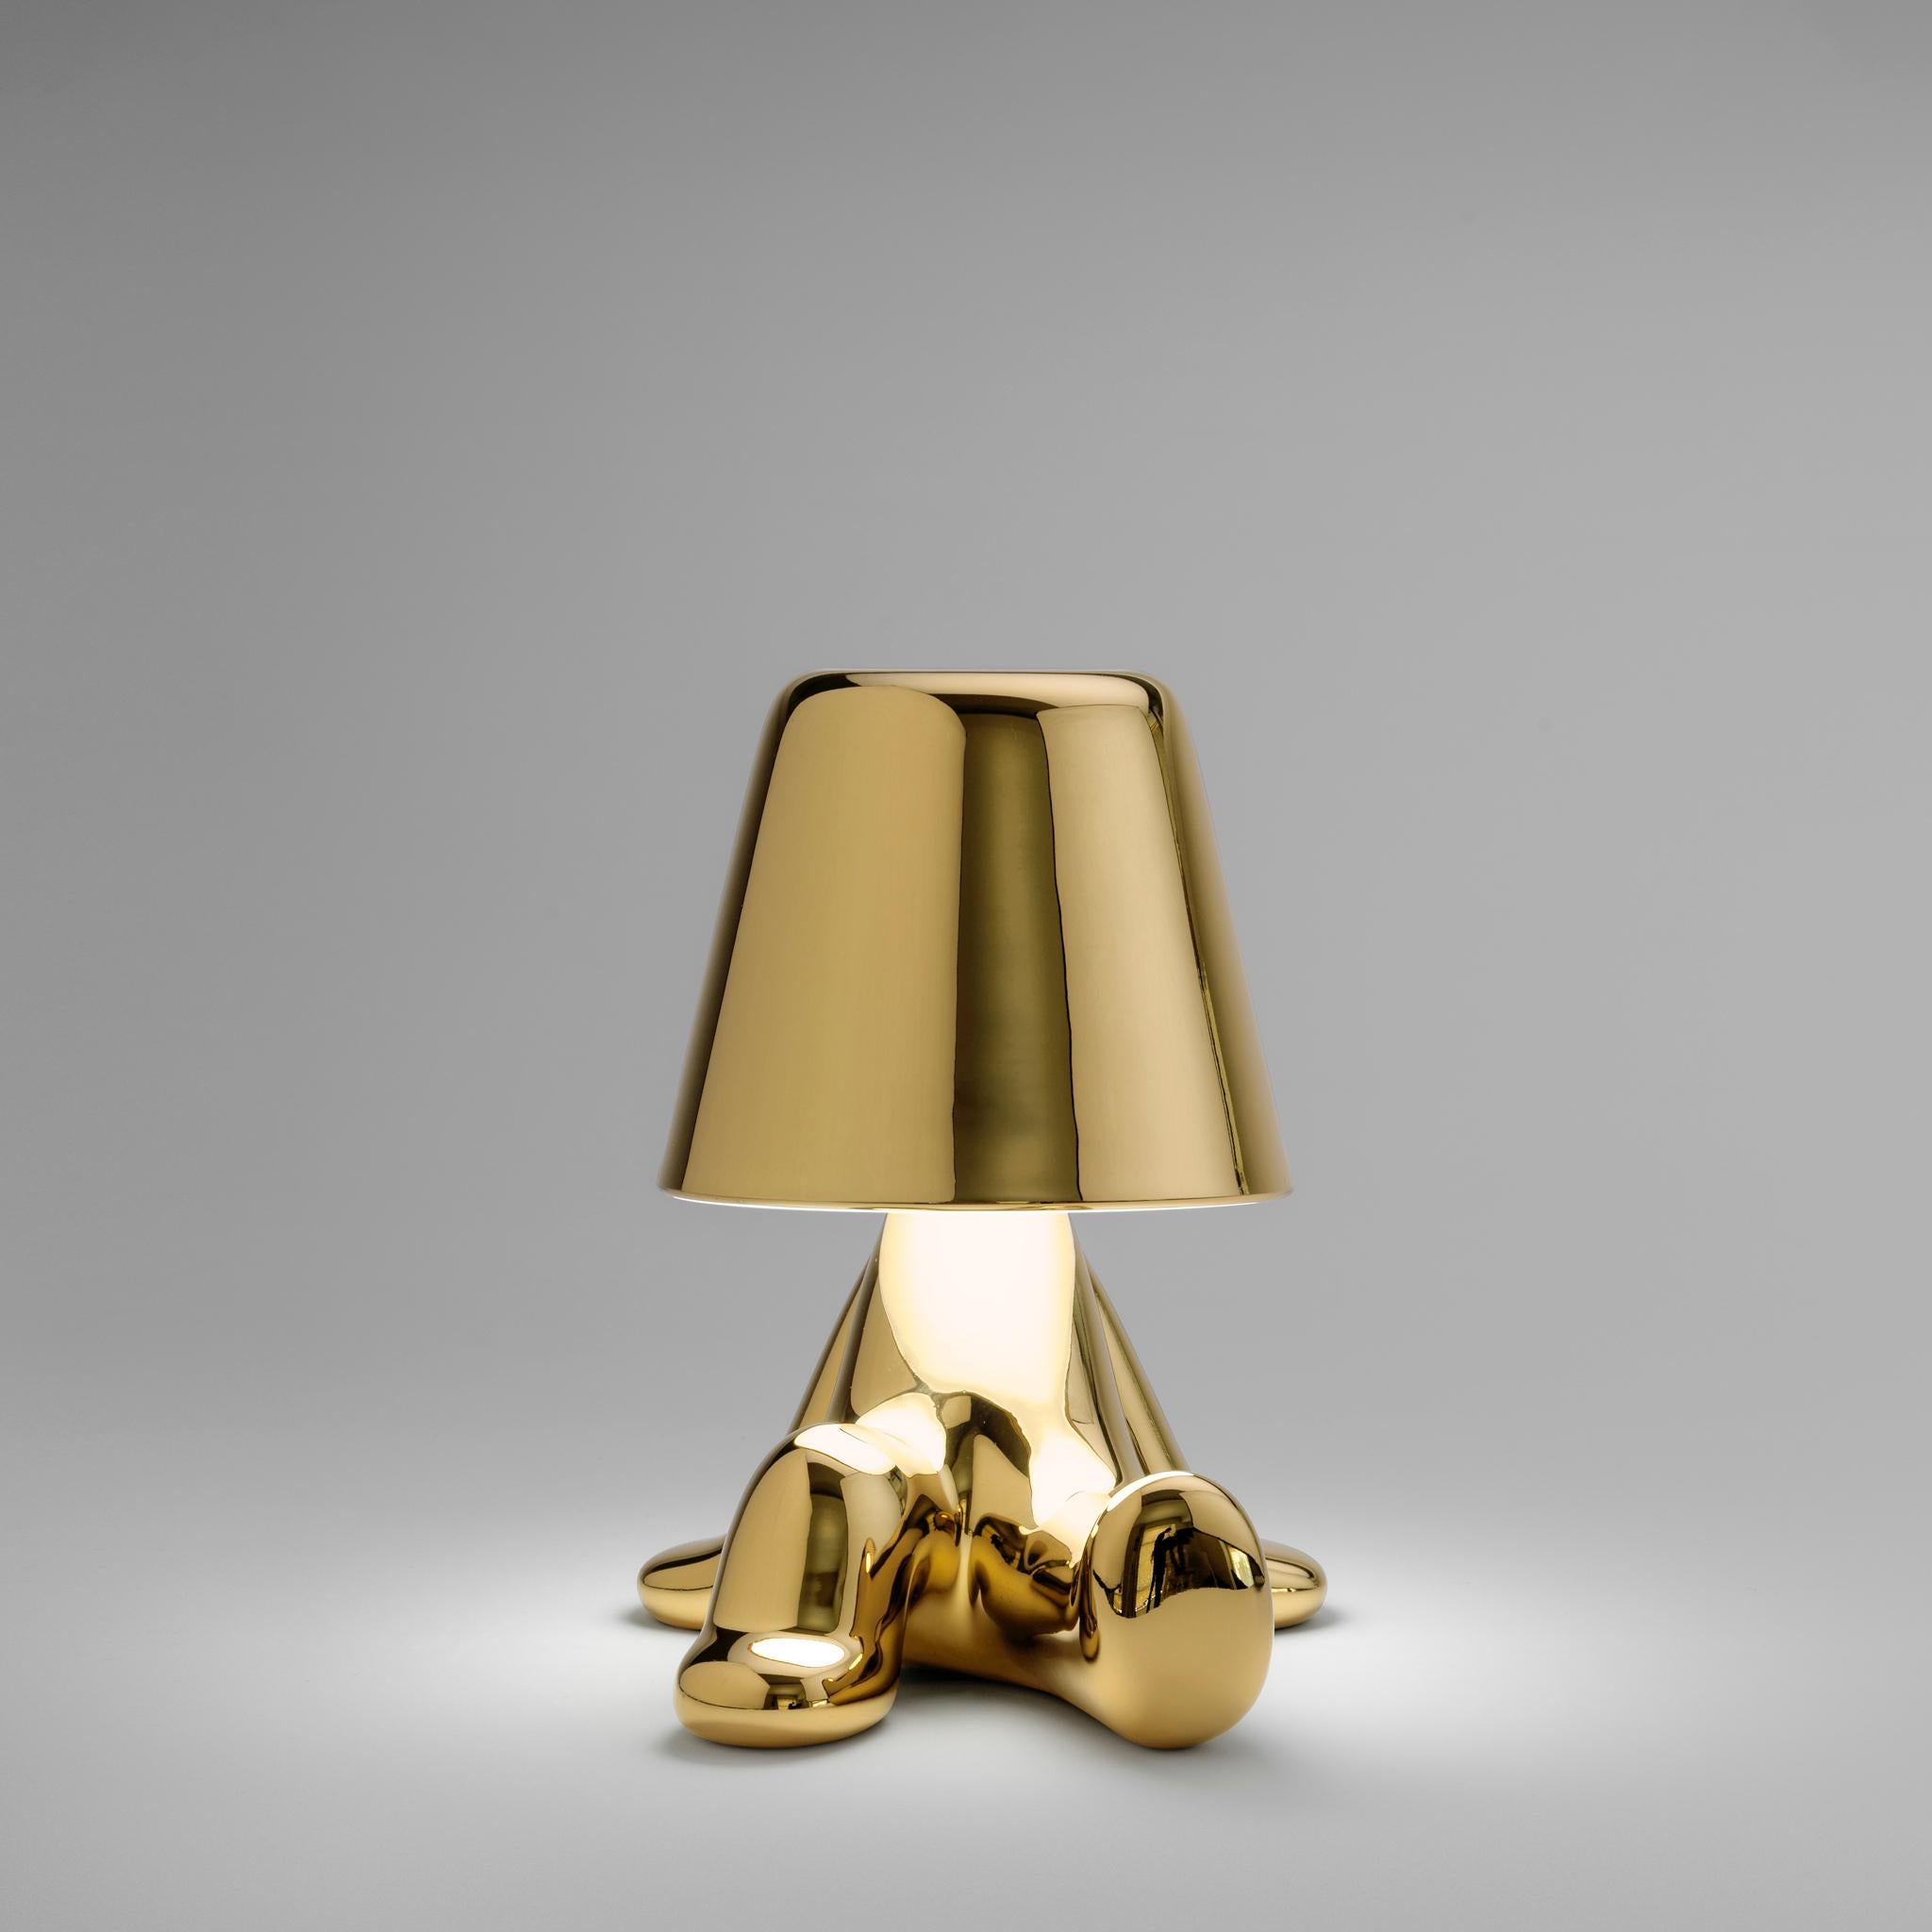 Modern Golden Brothers Bob LED Lamp, Designed by Stefano Giovannoni, Made in Italy